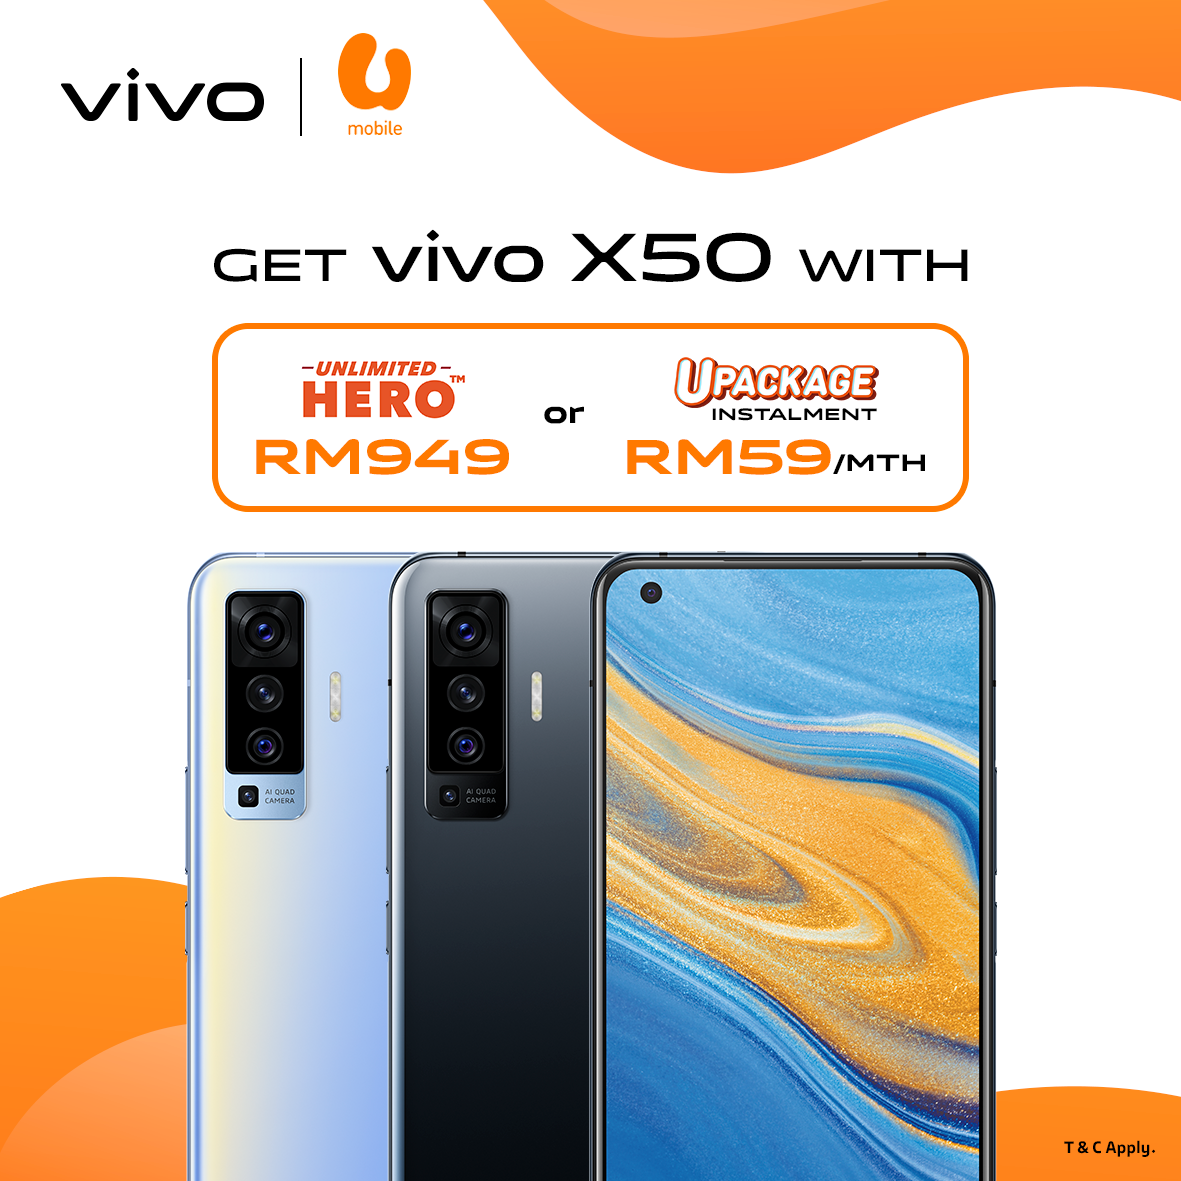 Vivo Malaysia S Newly Launched V20 Series Selfie Smartphones Are Now Available At Celcom With Special Deals Siennylovesdrawing Medium